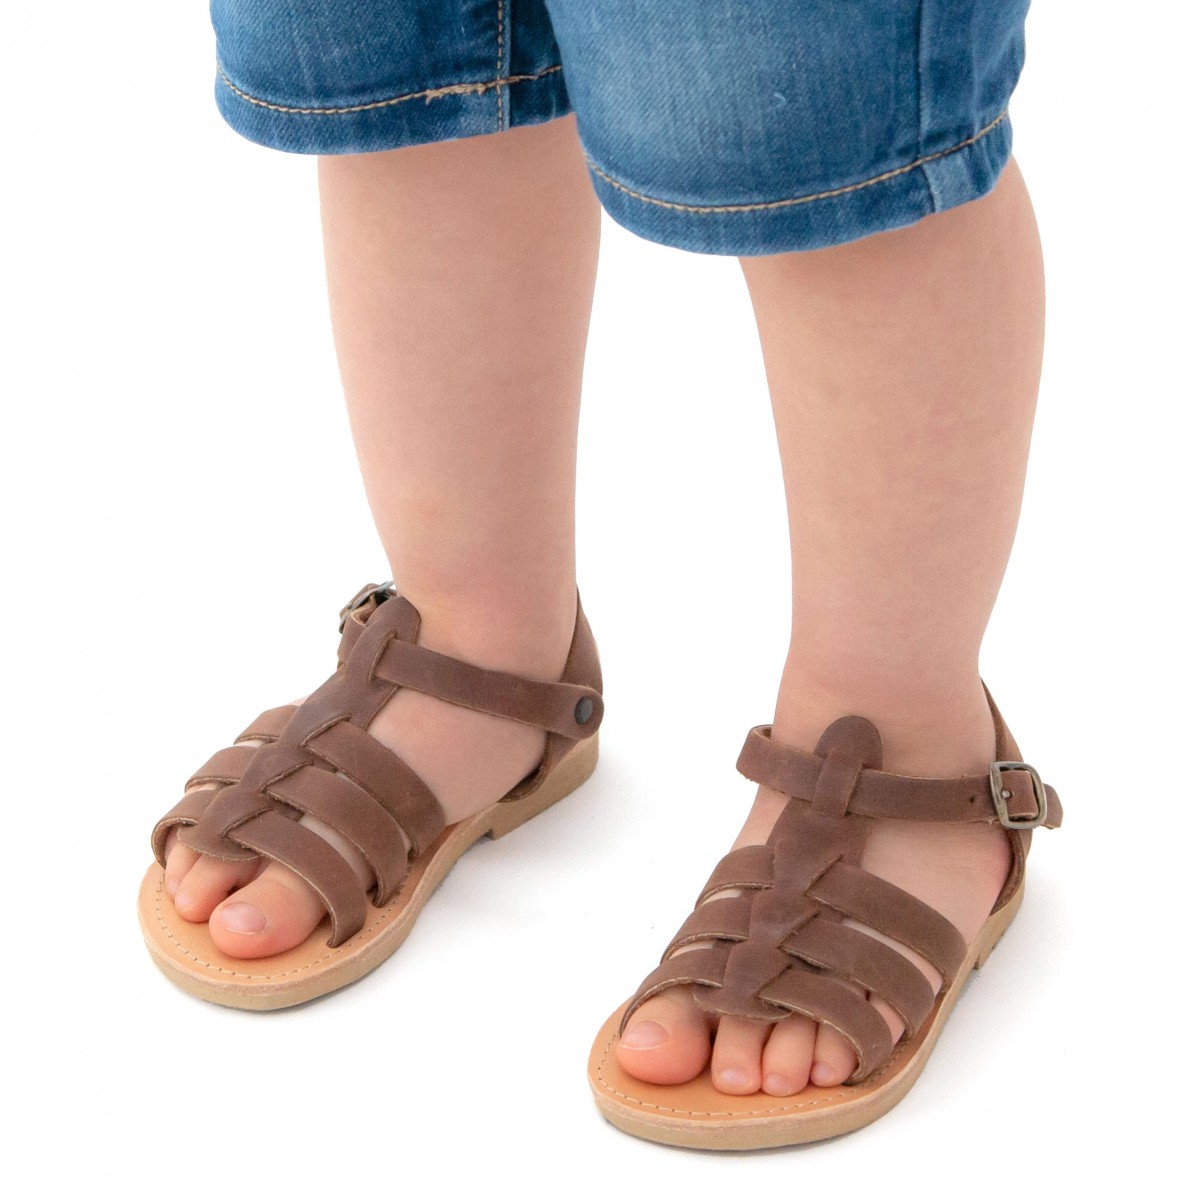 Child sandals in soft blue nubuck leather with buckle closure Attica sandals Shoes Boys Shoes Sandals 